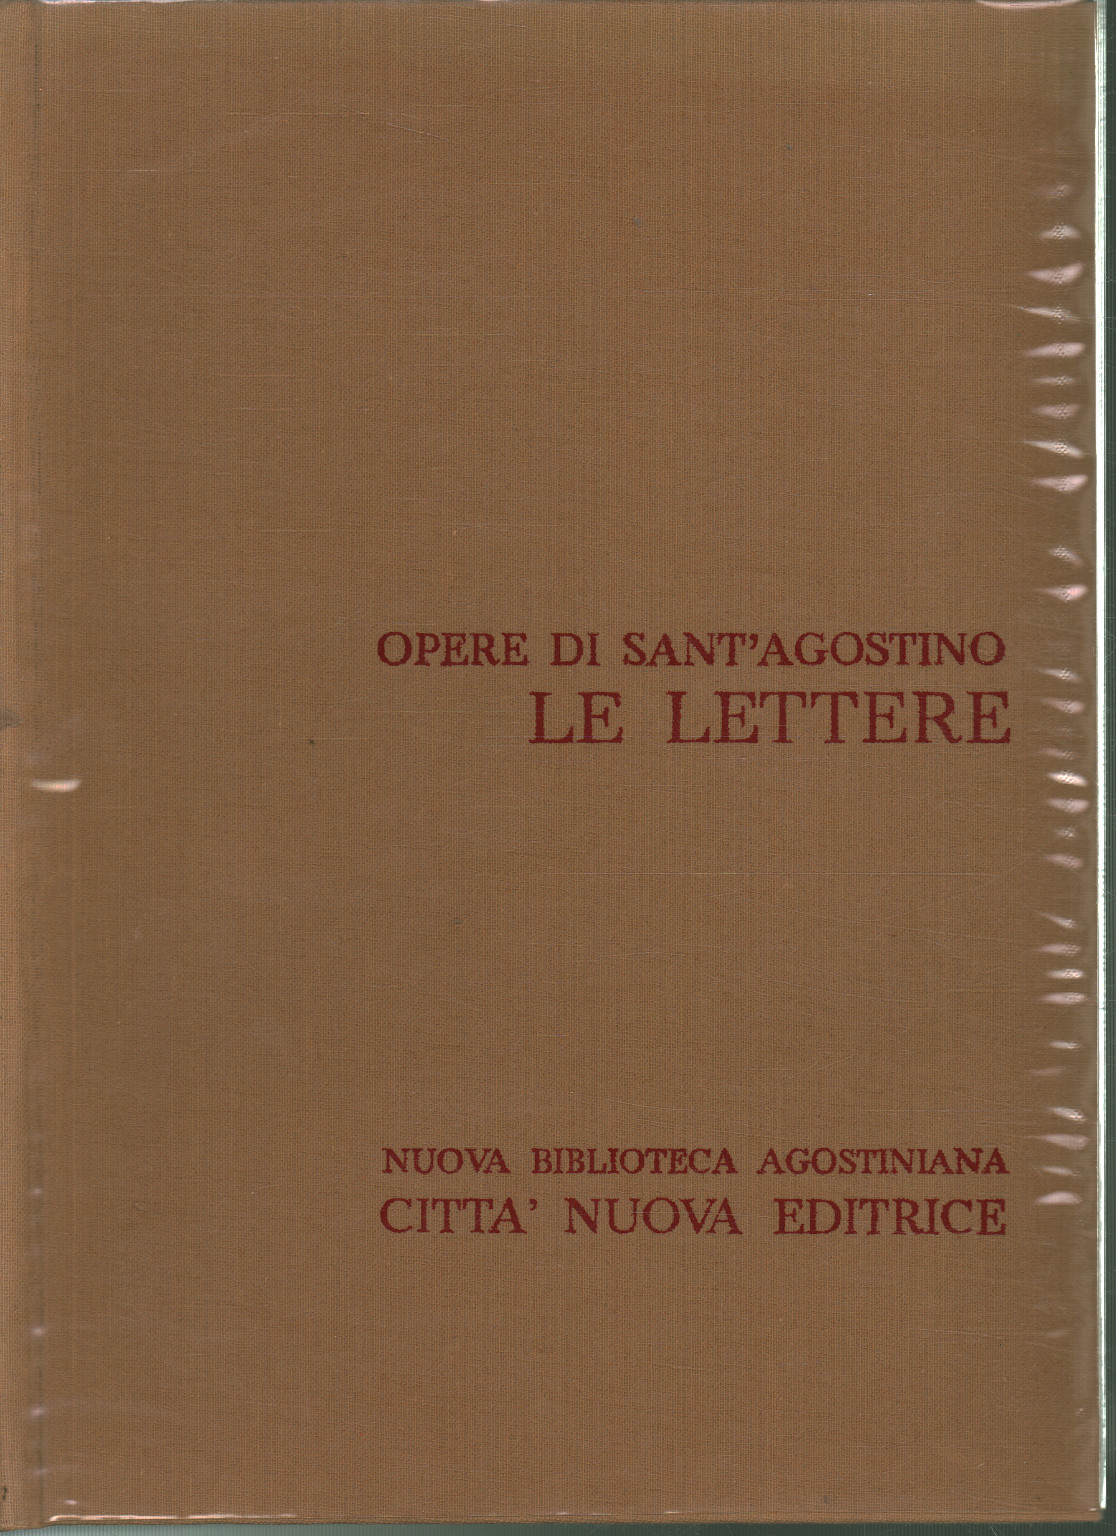 Works of Sant'Agostino XXI. The%